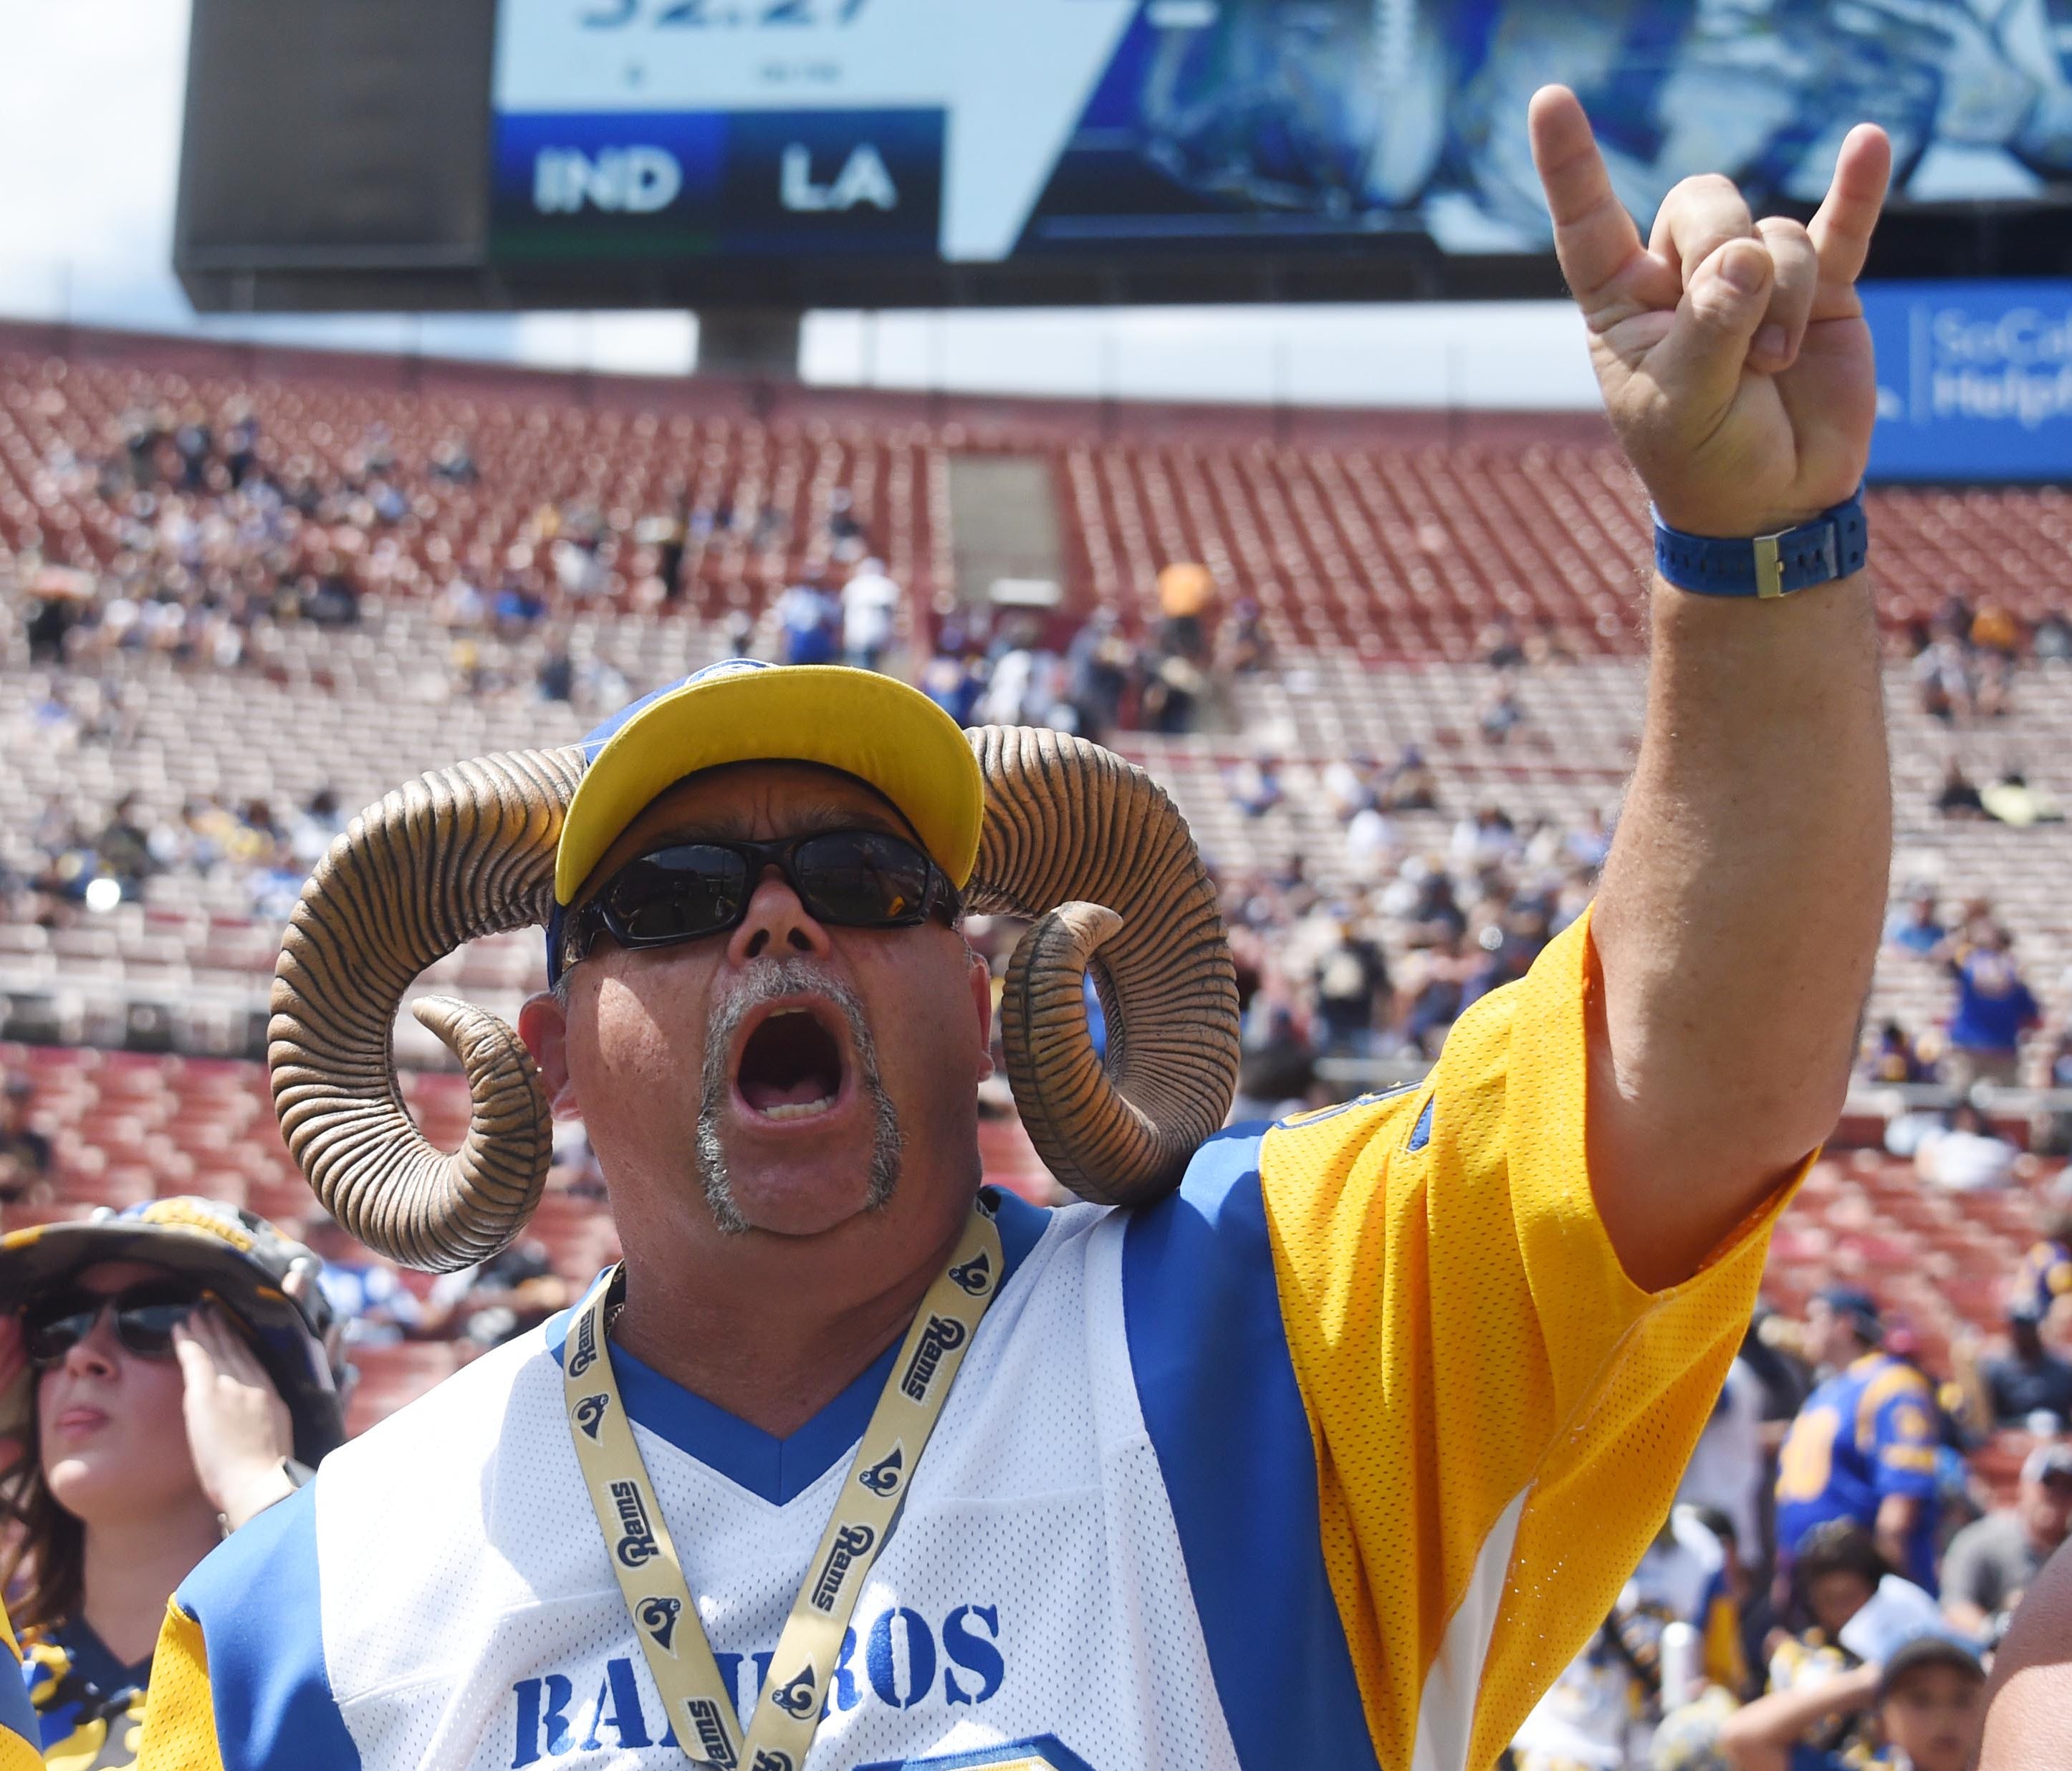 This Rams fan was excited for Sunday's season opener even if much of Los Angeles wasn't.